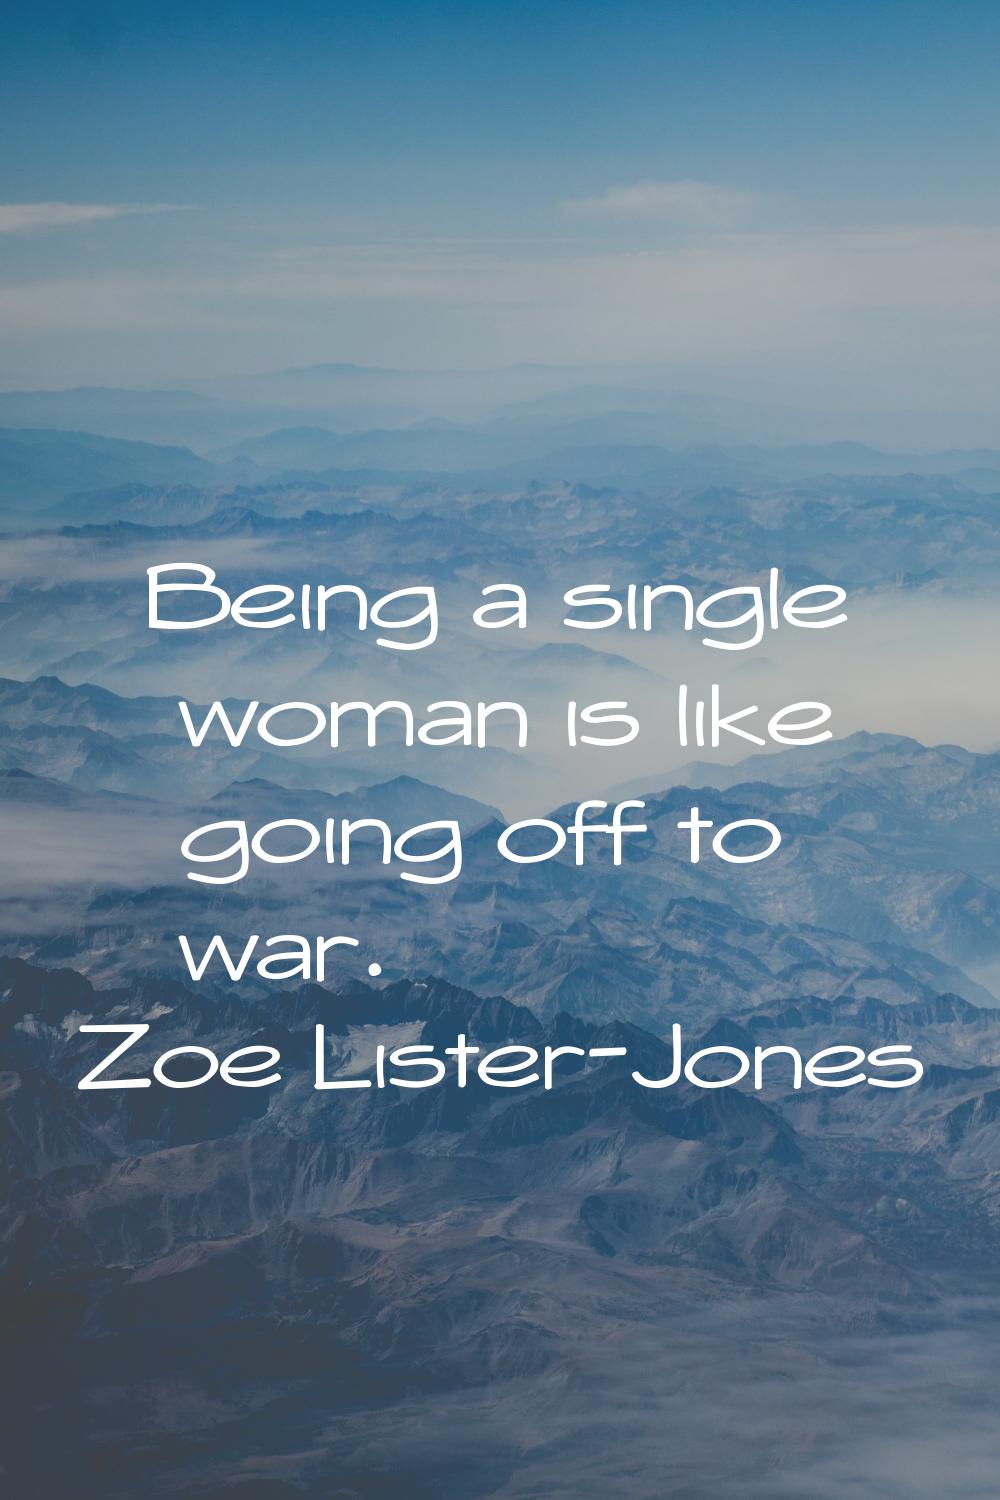 Being a single woman is like going off to war.